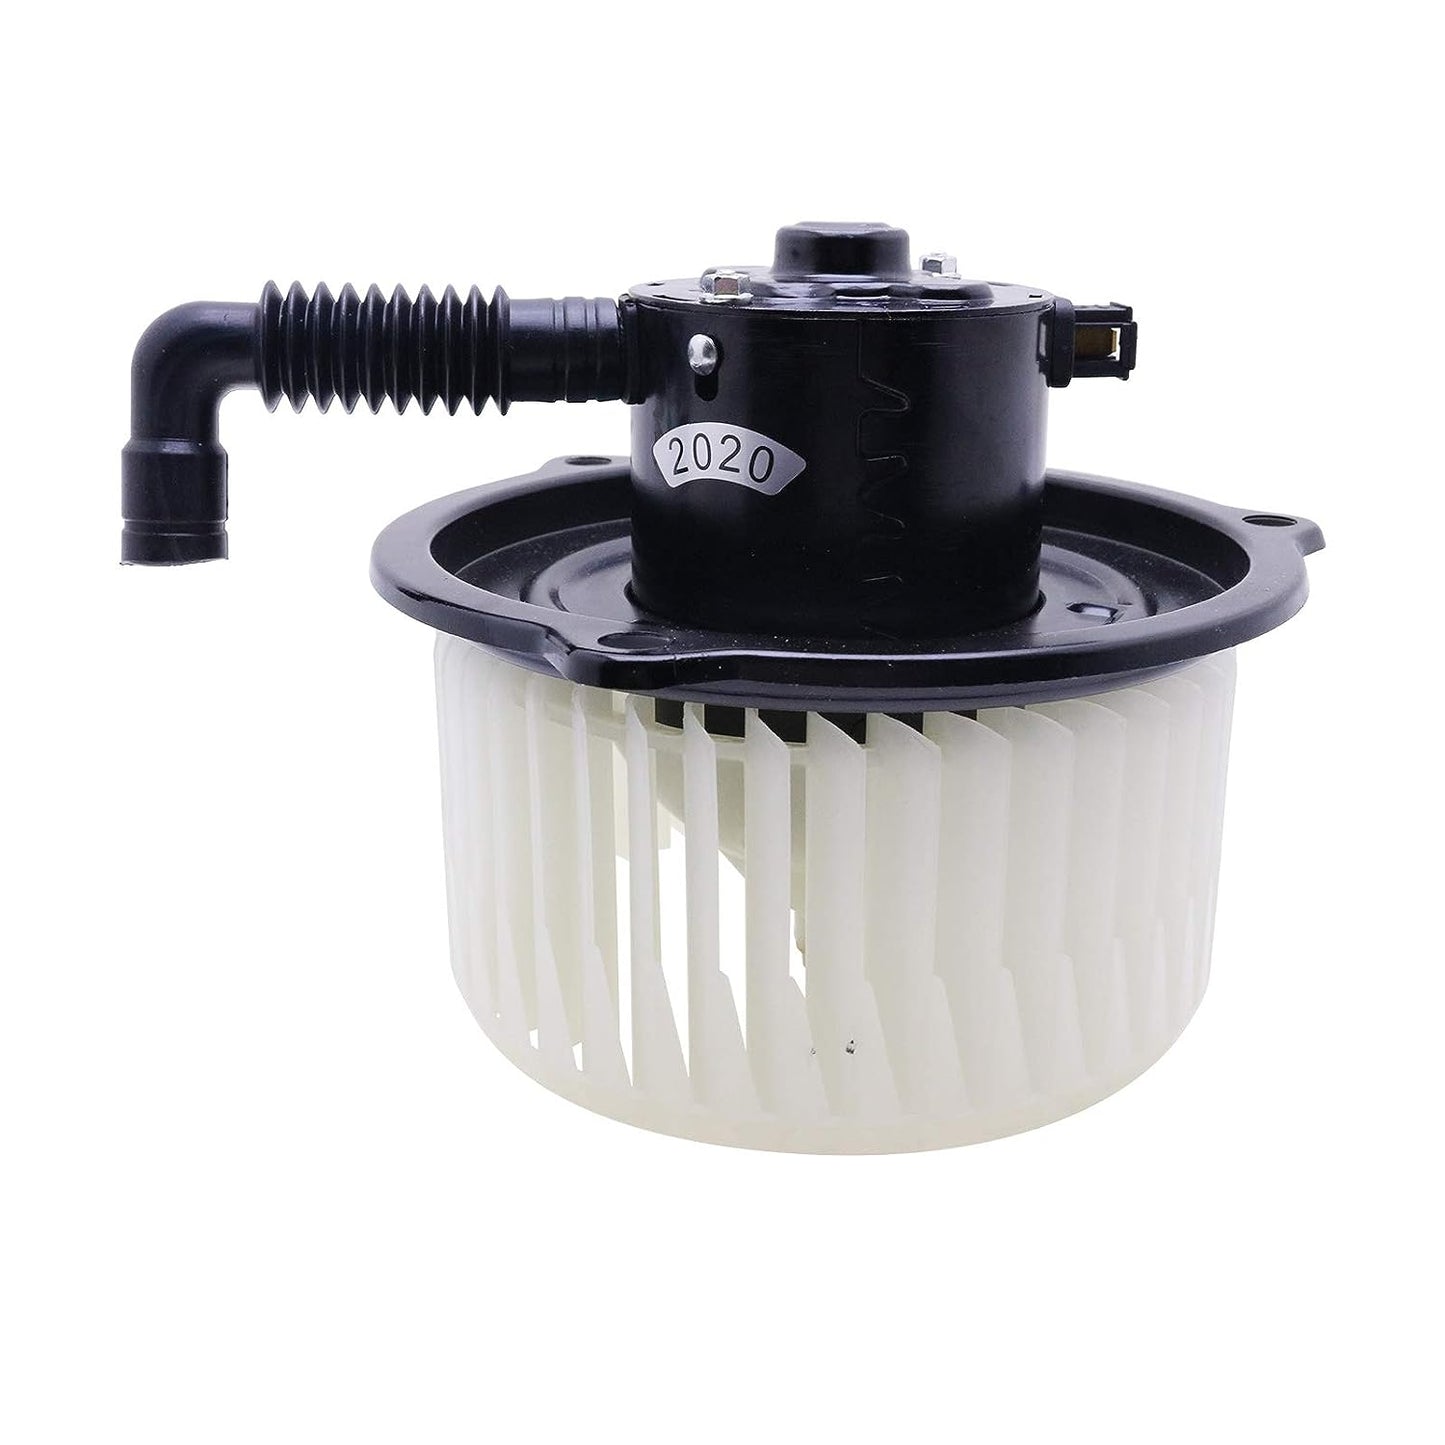 S871041120 Power Blower Motor Fan Compatible with Toyota. Hino 268 258 2007 - 2008 24V